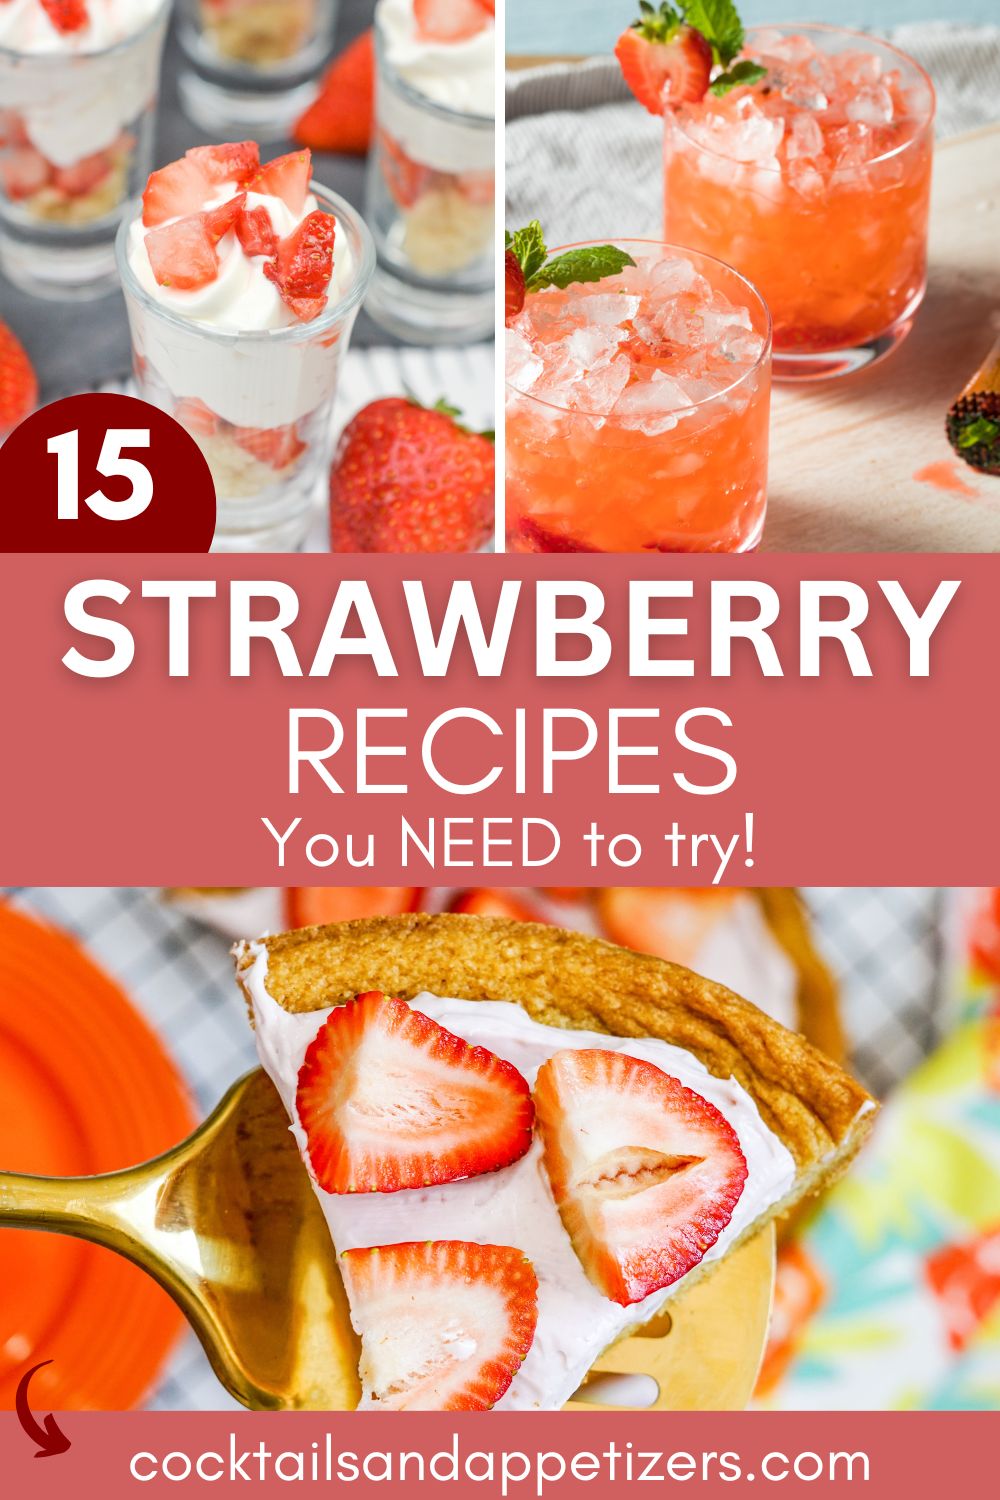 Strawberry drinks and desserts